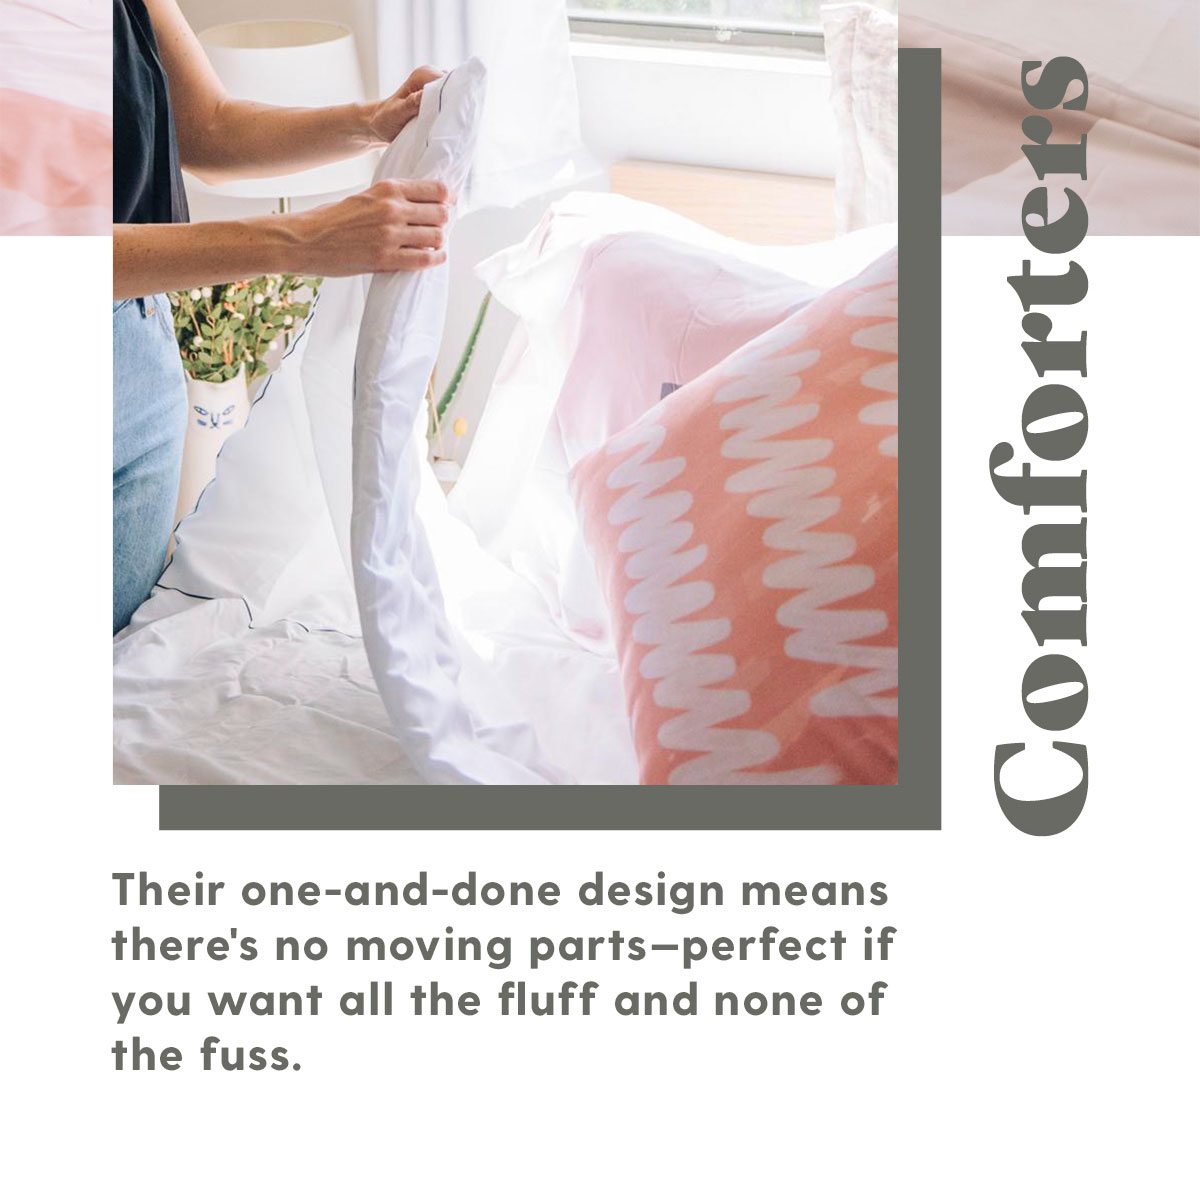 Comforters: Their one-and-done design means there's no moving parts—perfect if you want all the fluff and none of the fuss.